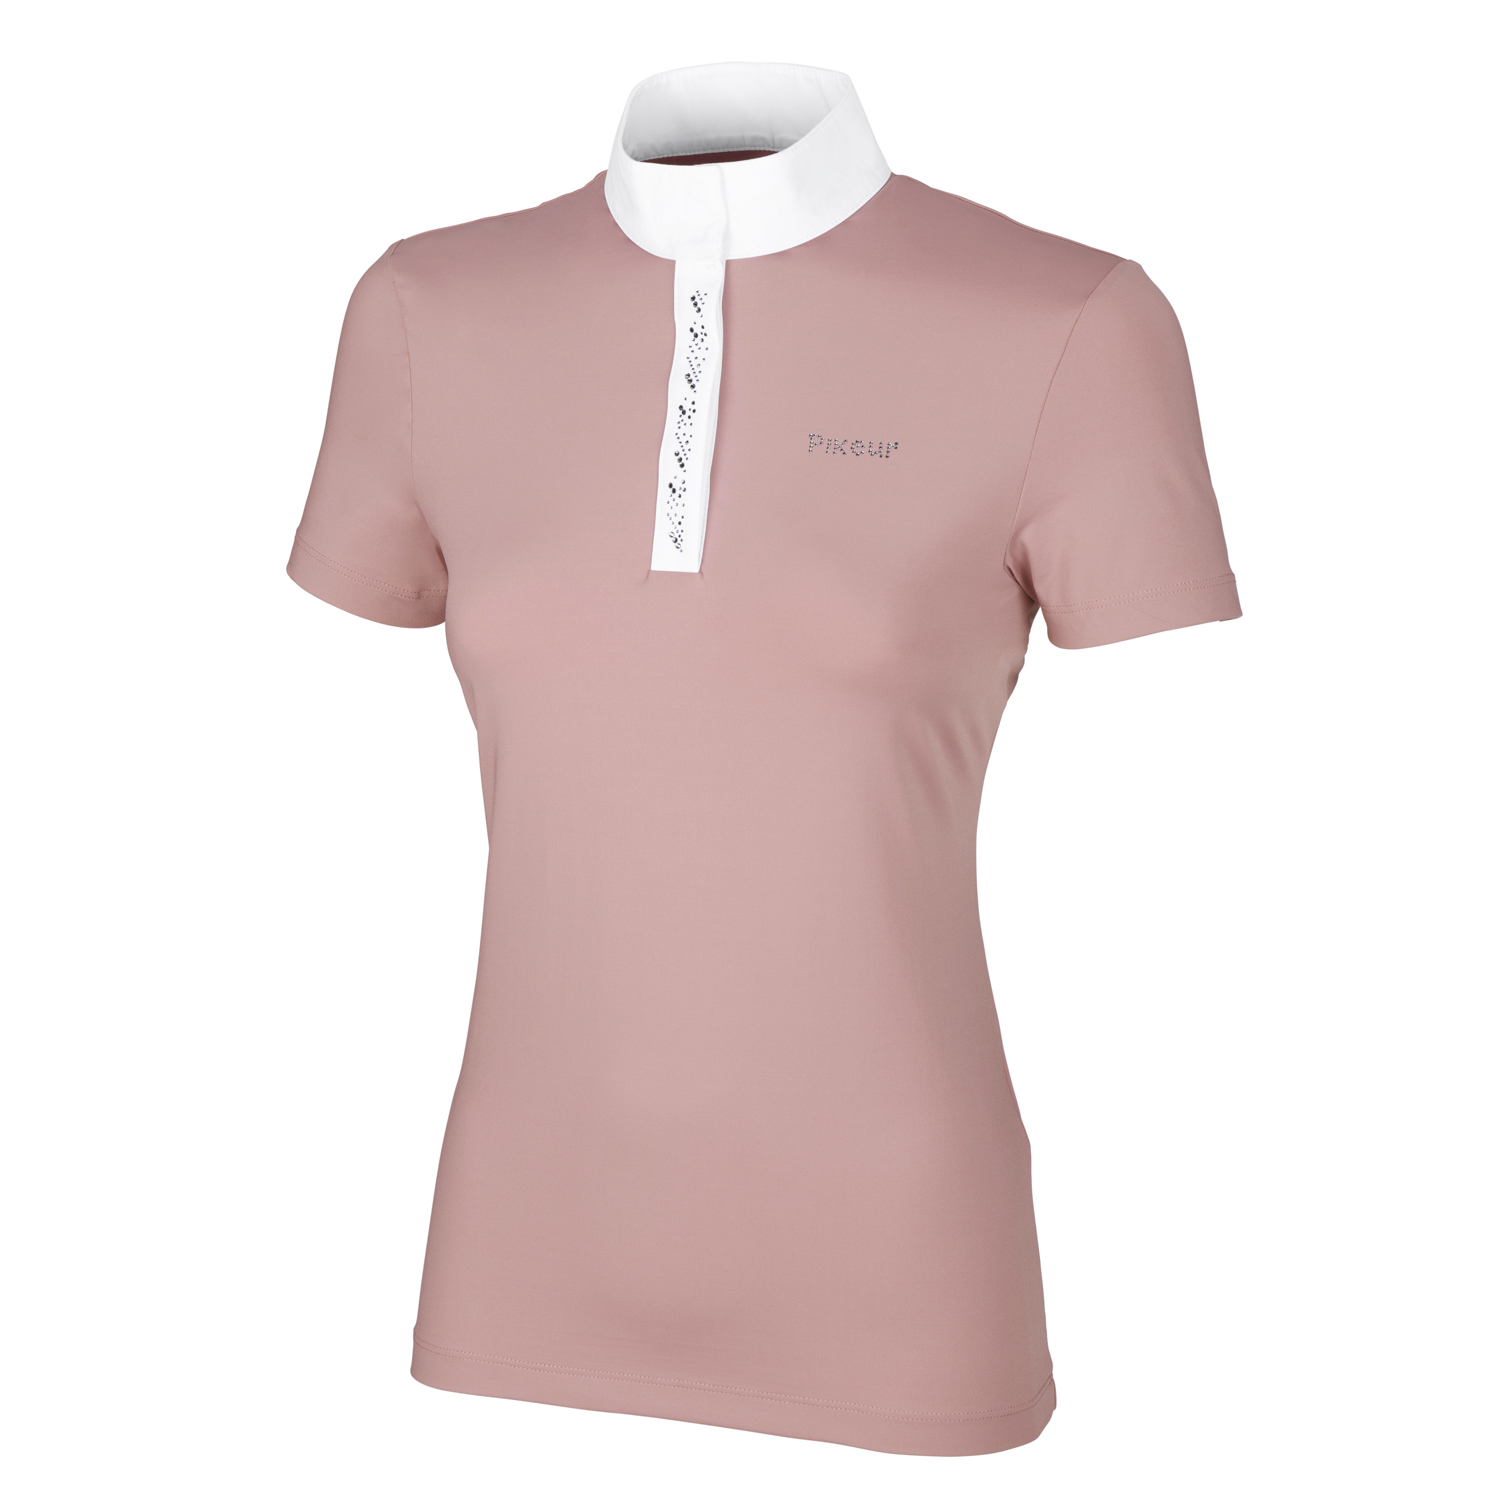 Pikeur Turniershirt Competition Shirt in pale mauve